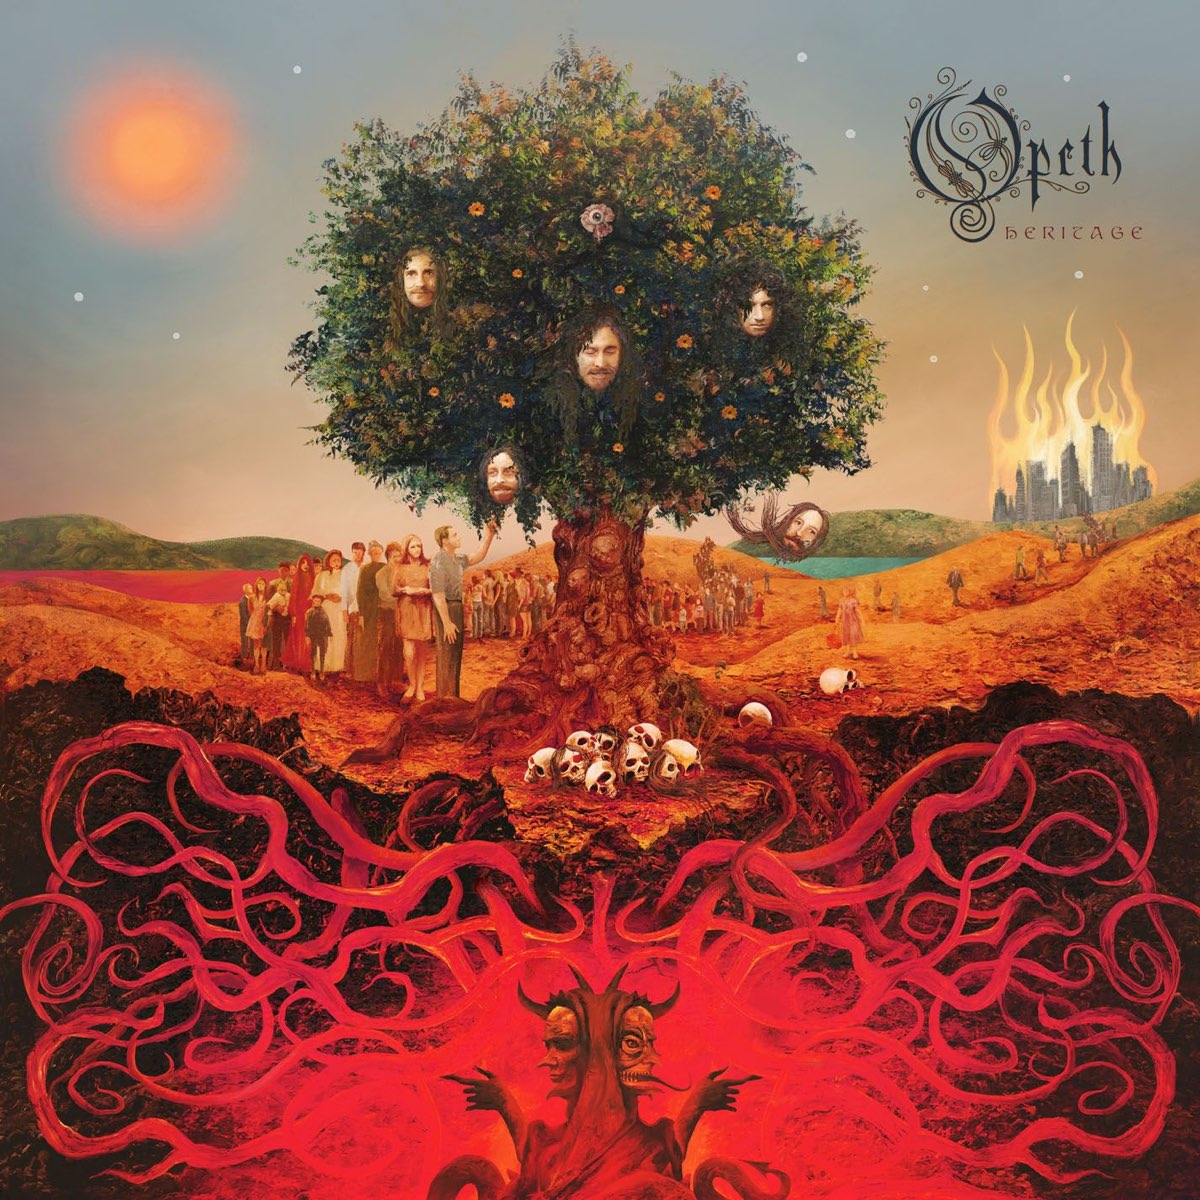 Heritage by Opeth on Apple Music